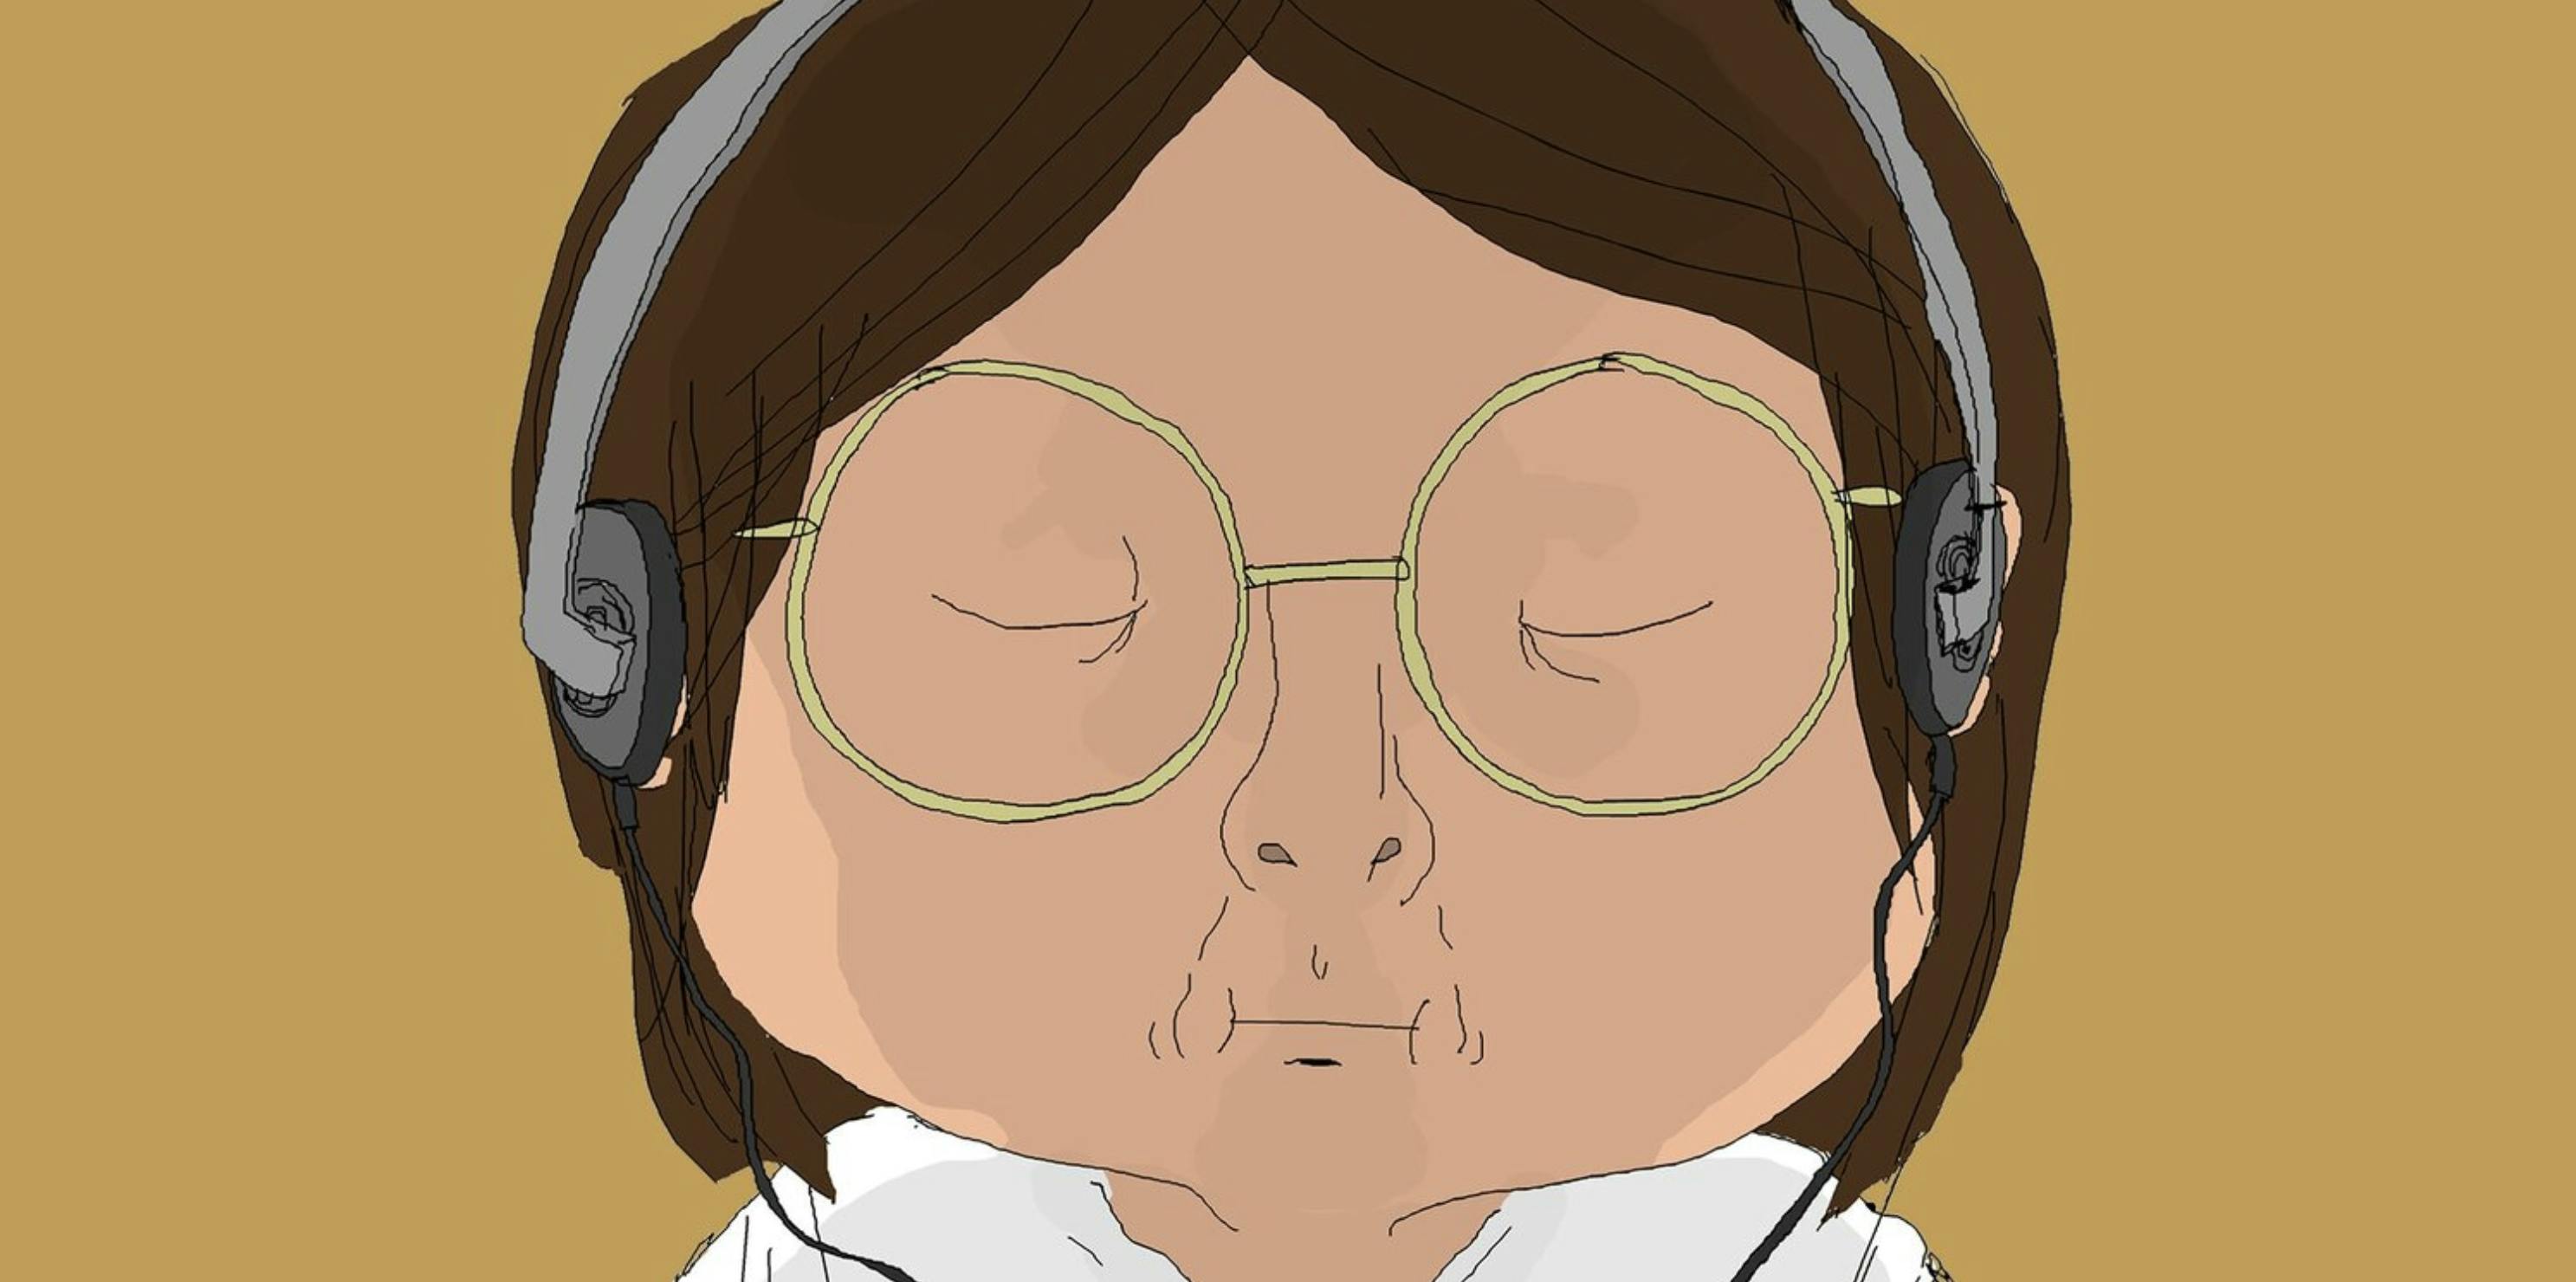 A boy with long brown hair and wiry glasses closes his eyes while listening to a pair of headphones.